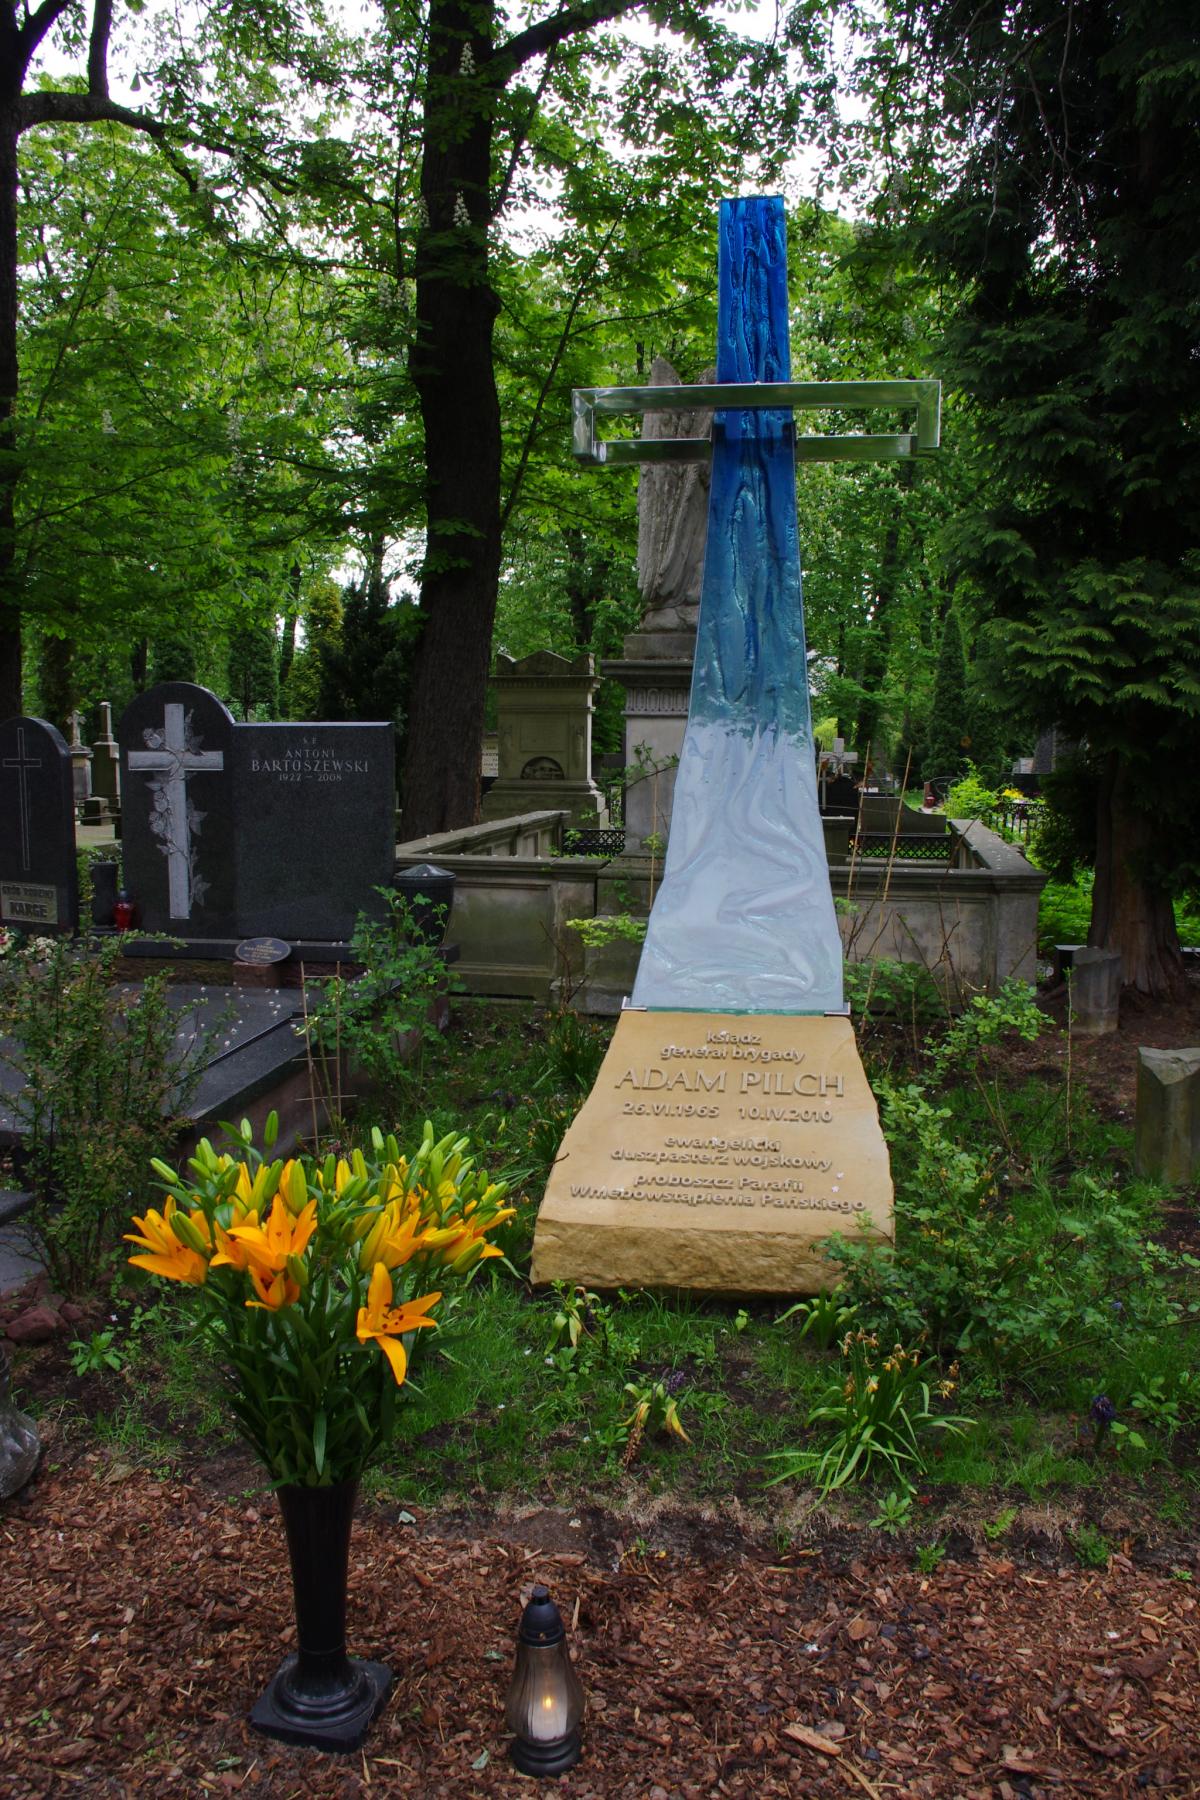 Wikipedia, Adam Pilch, Evangelical-Augsburg Cemetery in Warsaw, Self-published work, Taken with Pent